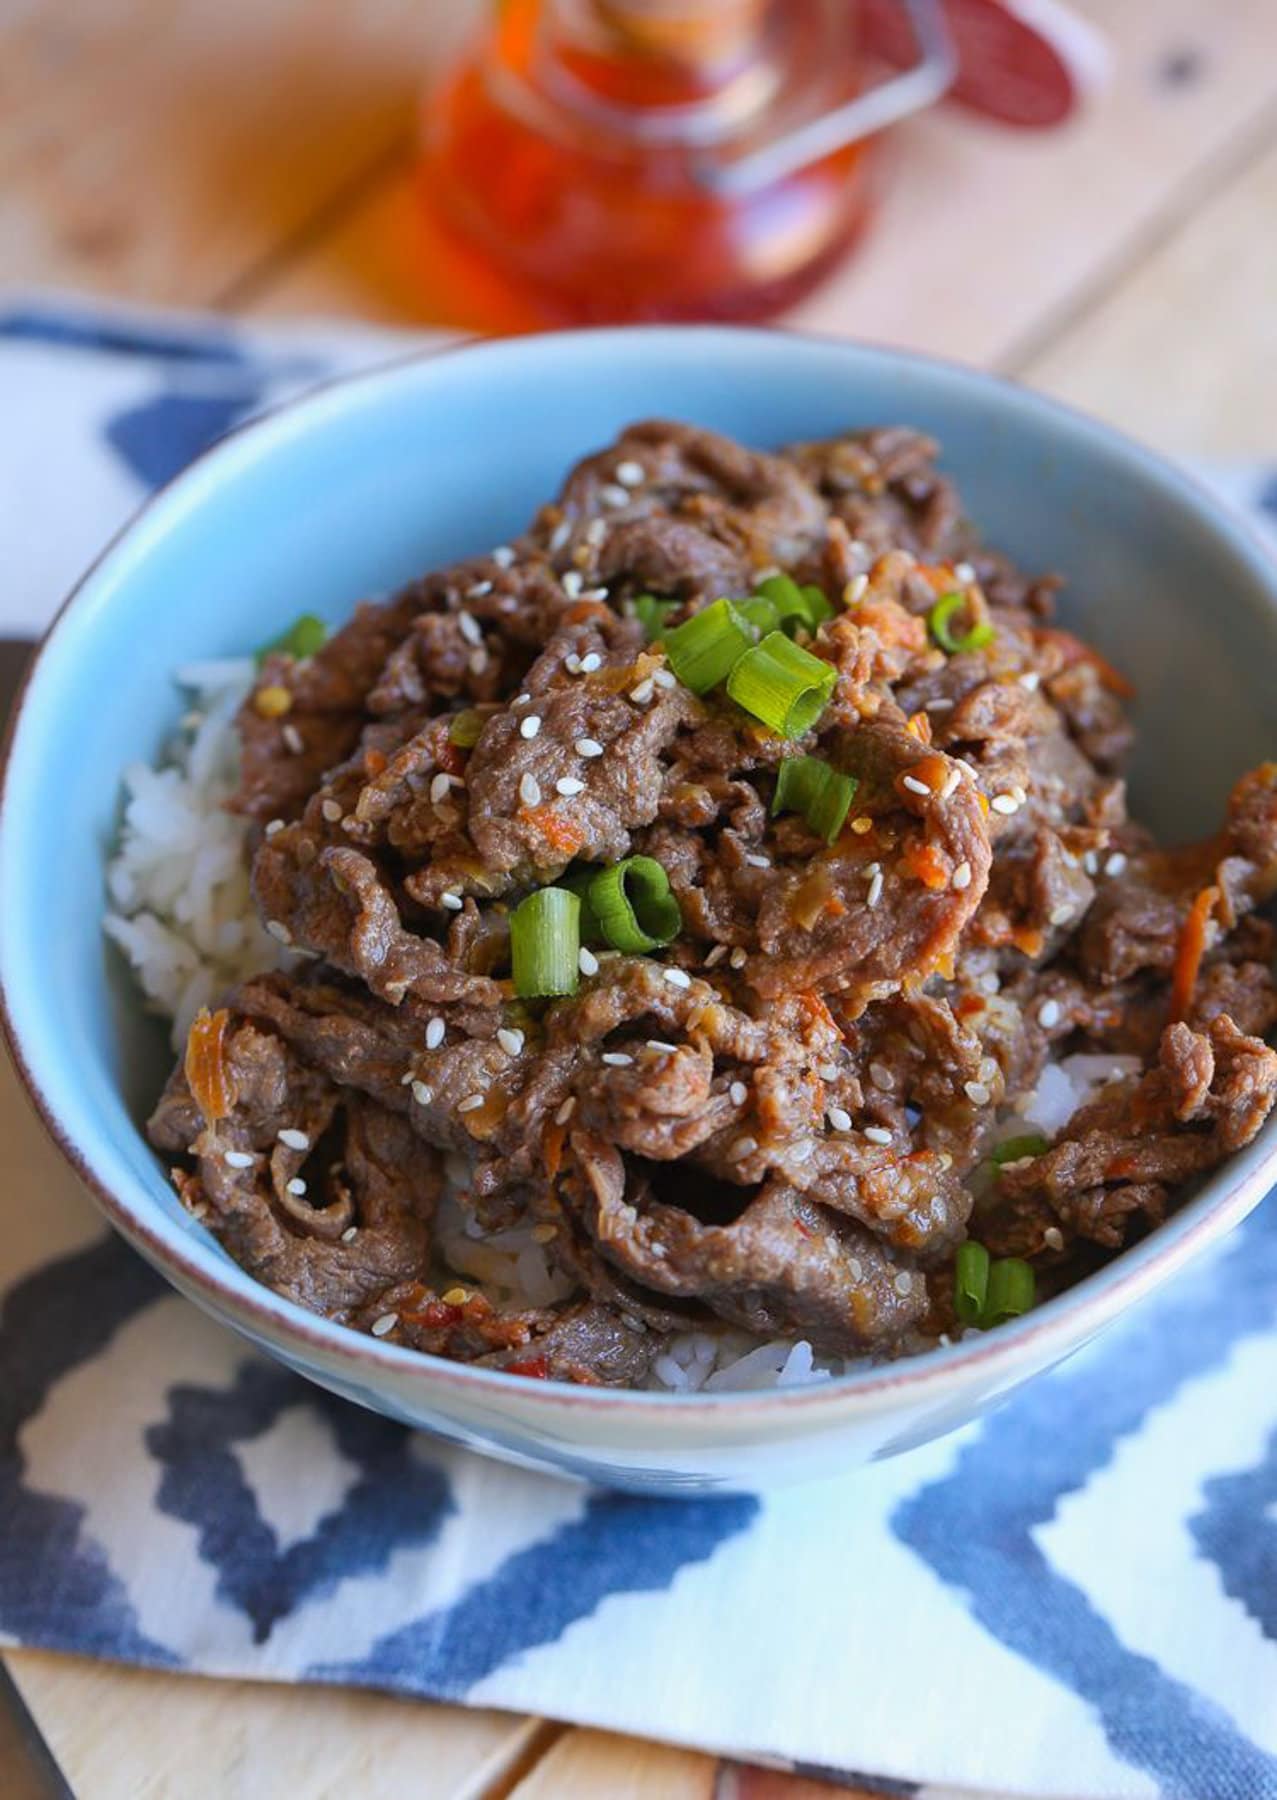 Spicy meat laid on a bed of rice